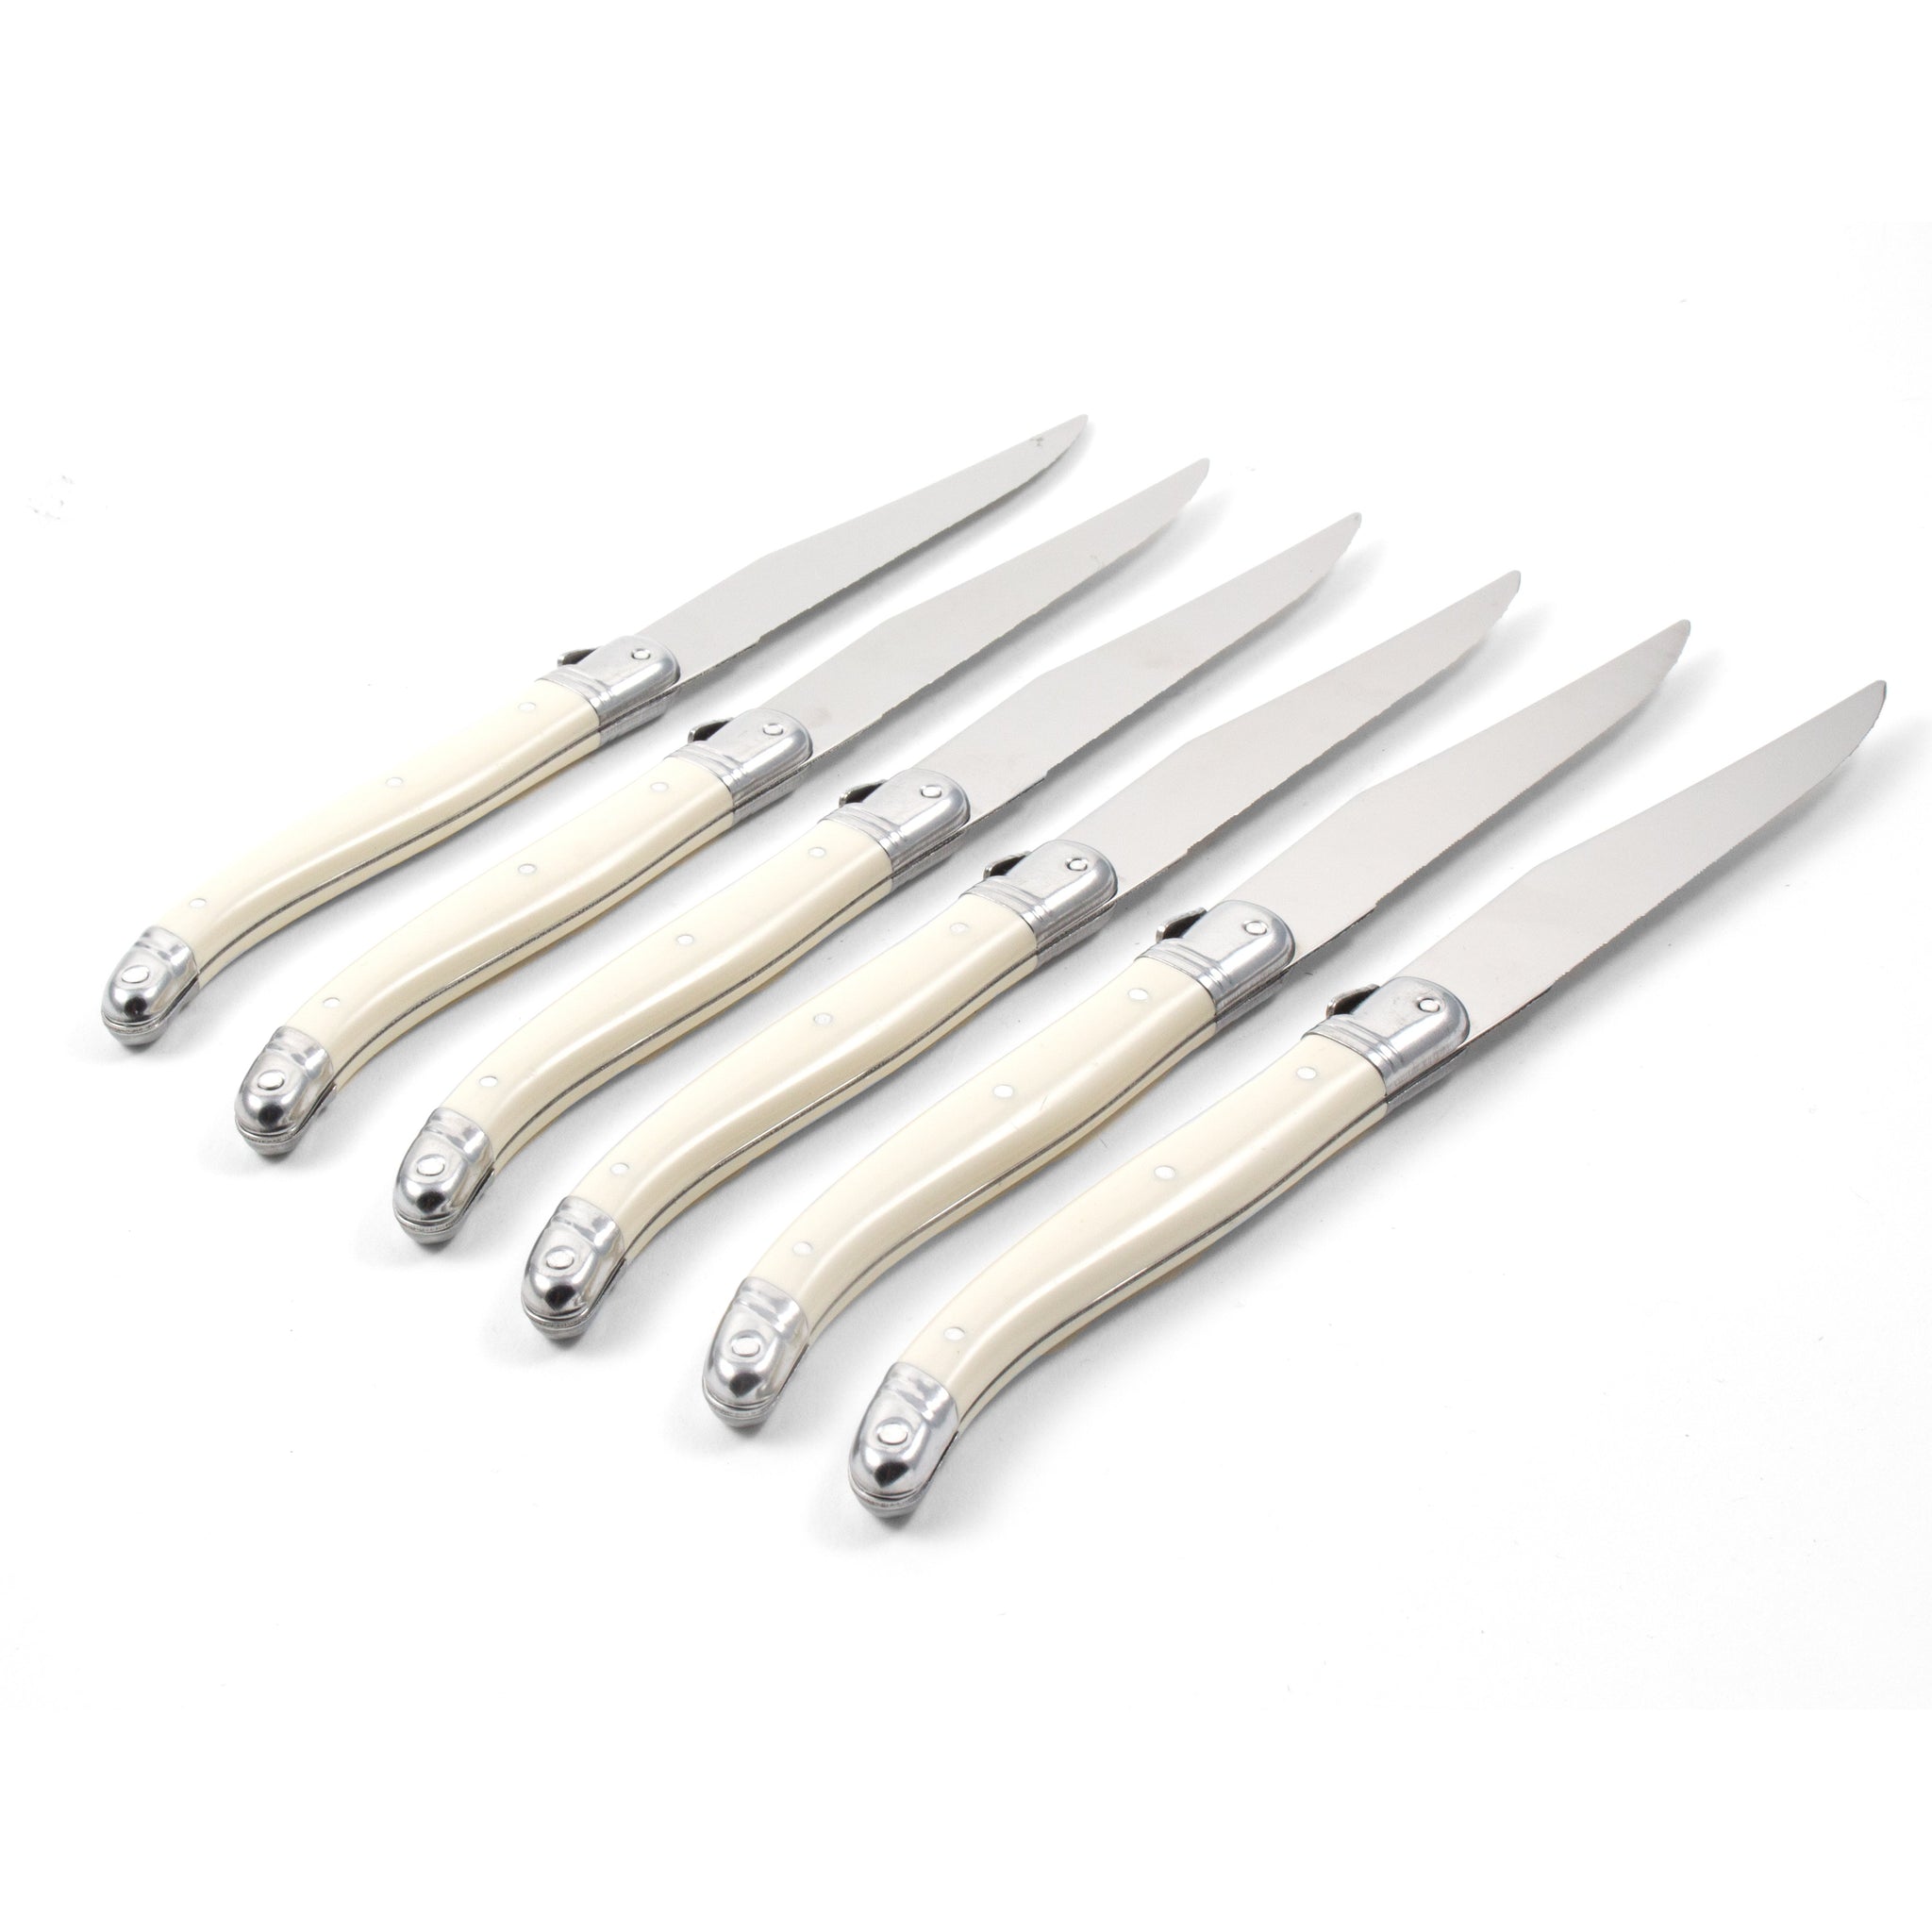 Laguiole 6 Piece Ivory Knife Set in Wooden Box - French Dry Goods